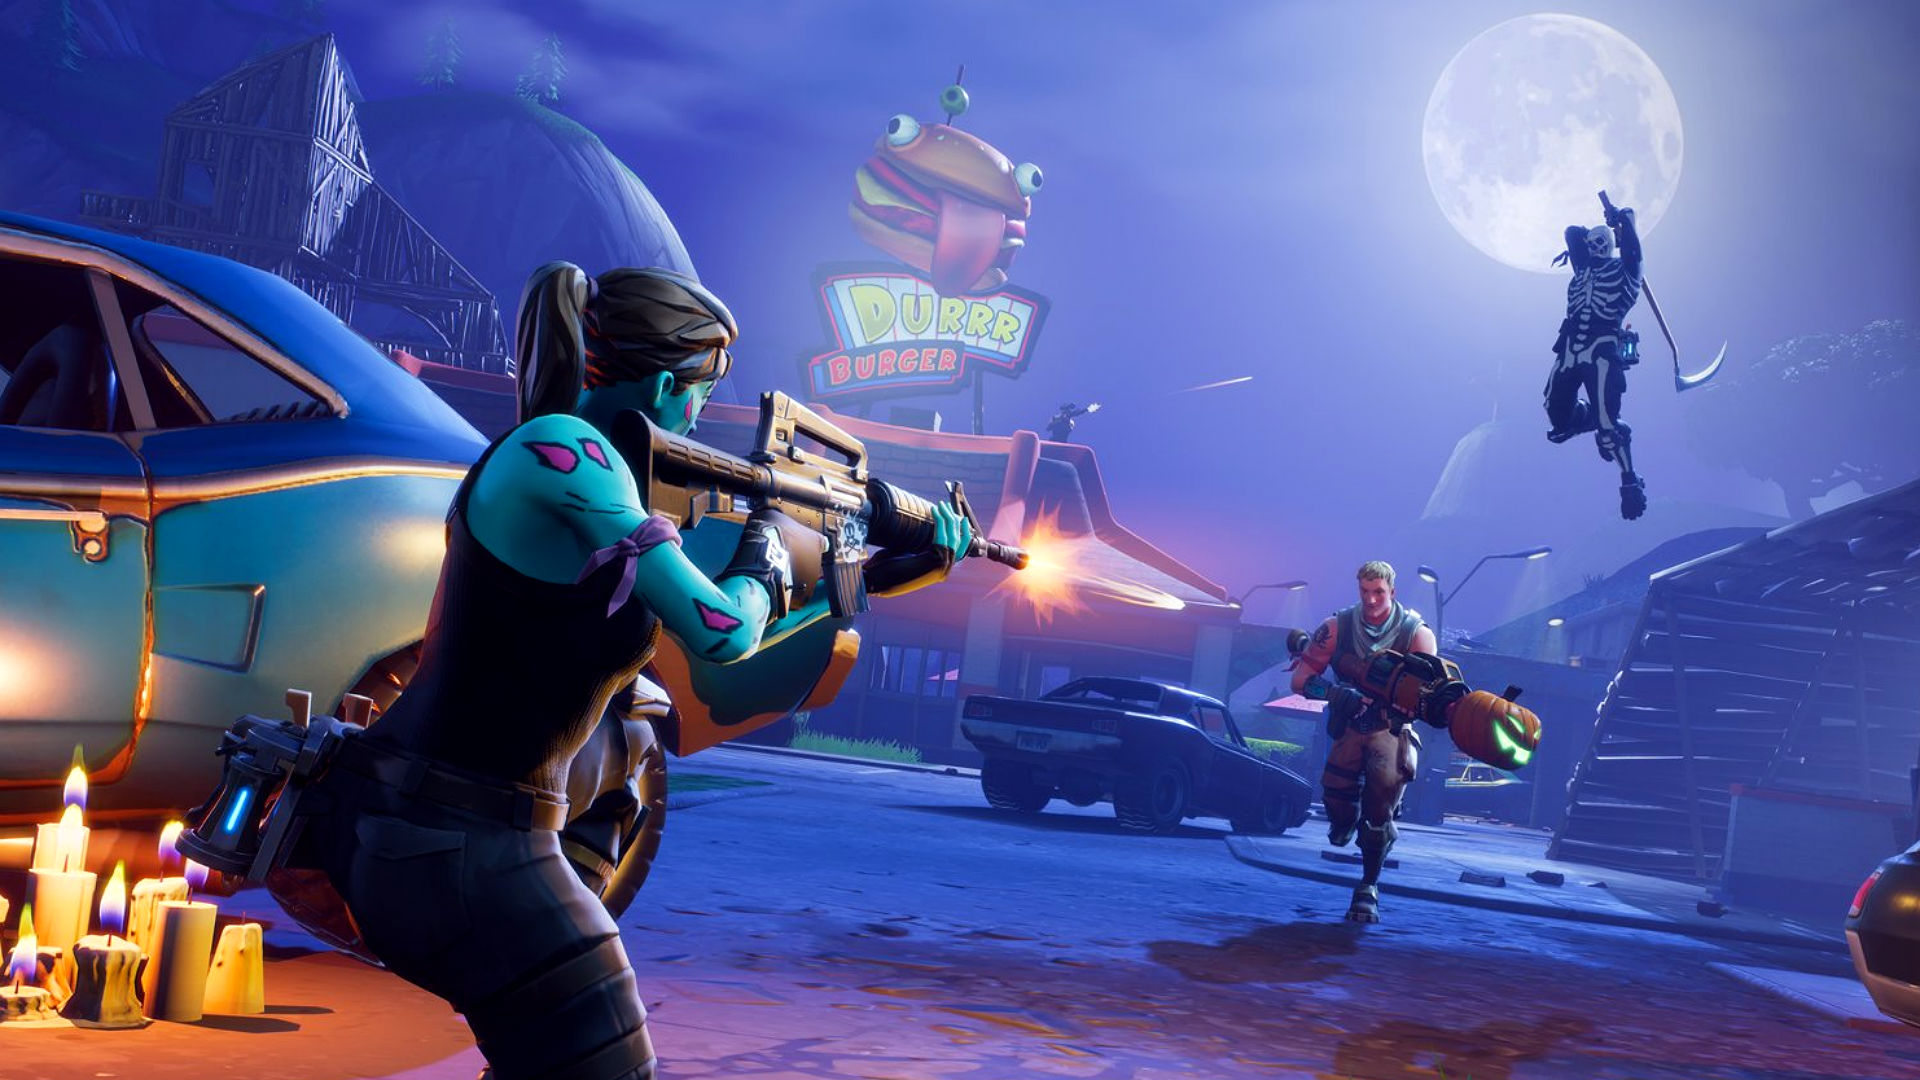 Best Fortnite Skins Ranked The Finest From The Fortnite Item Shop